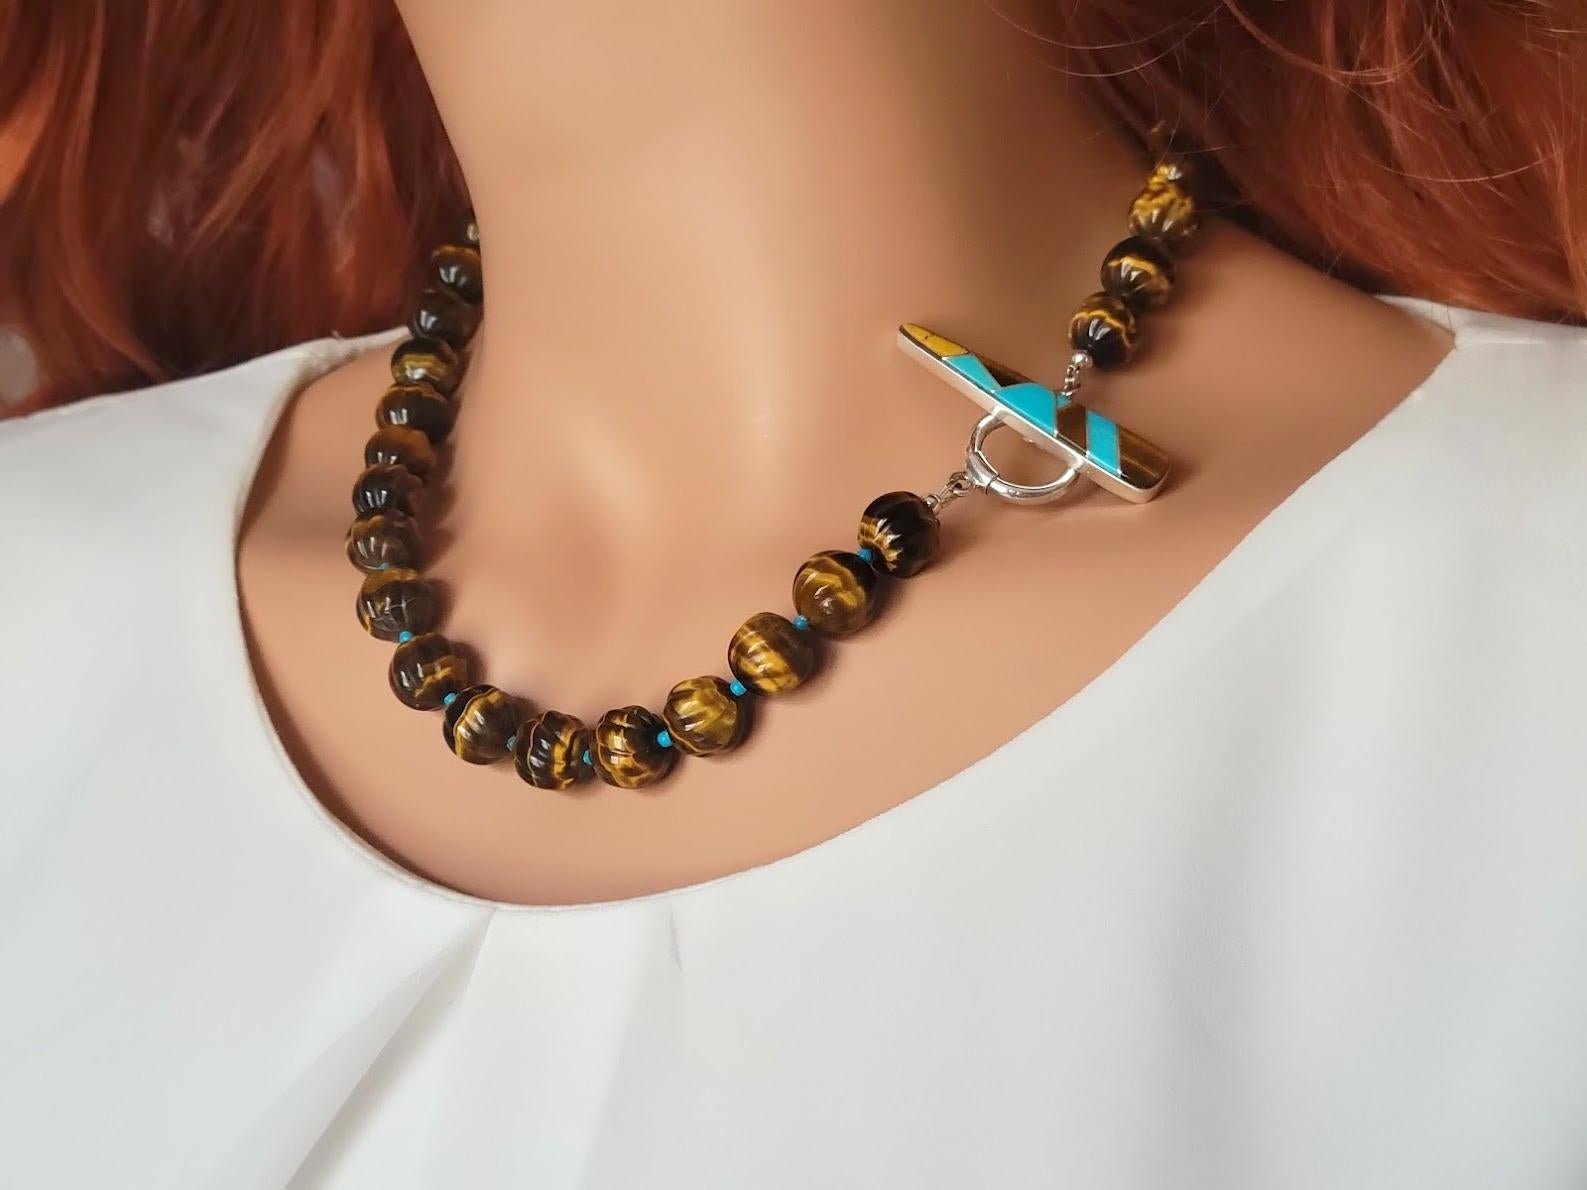 Women's Tiger's Eye and Turquoise Necklace